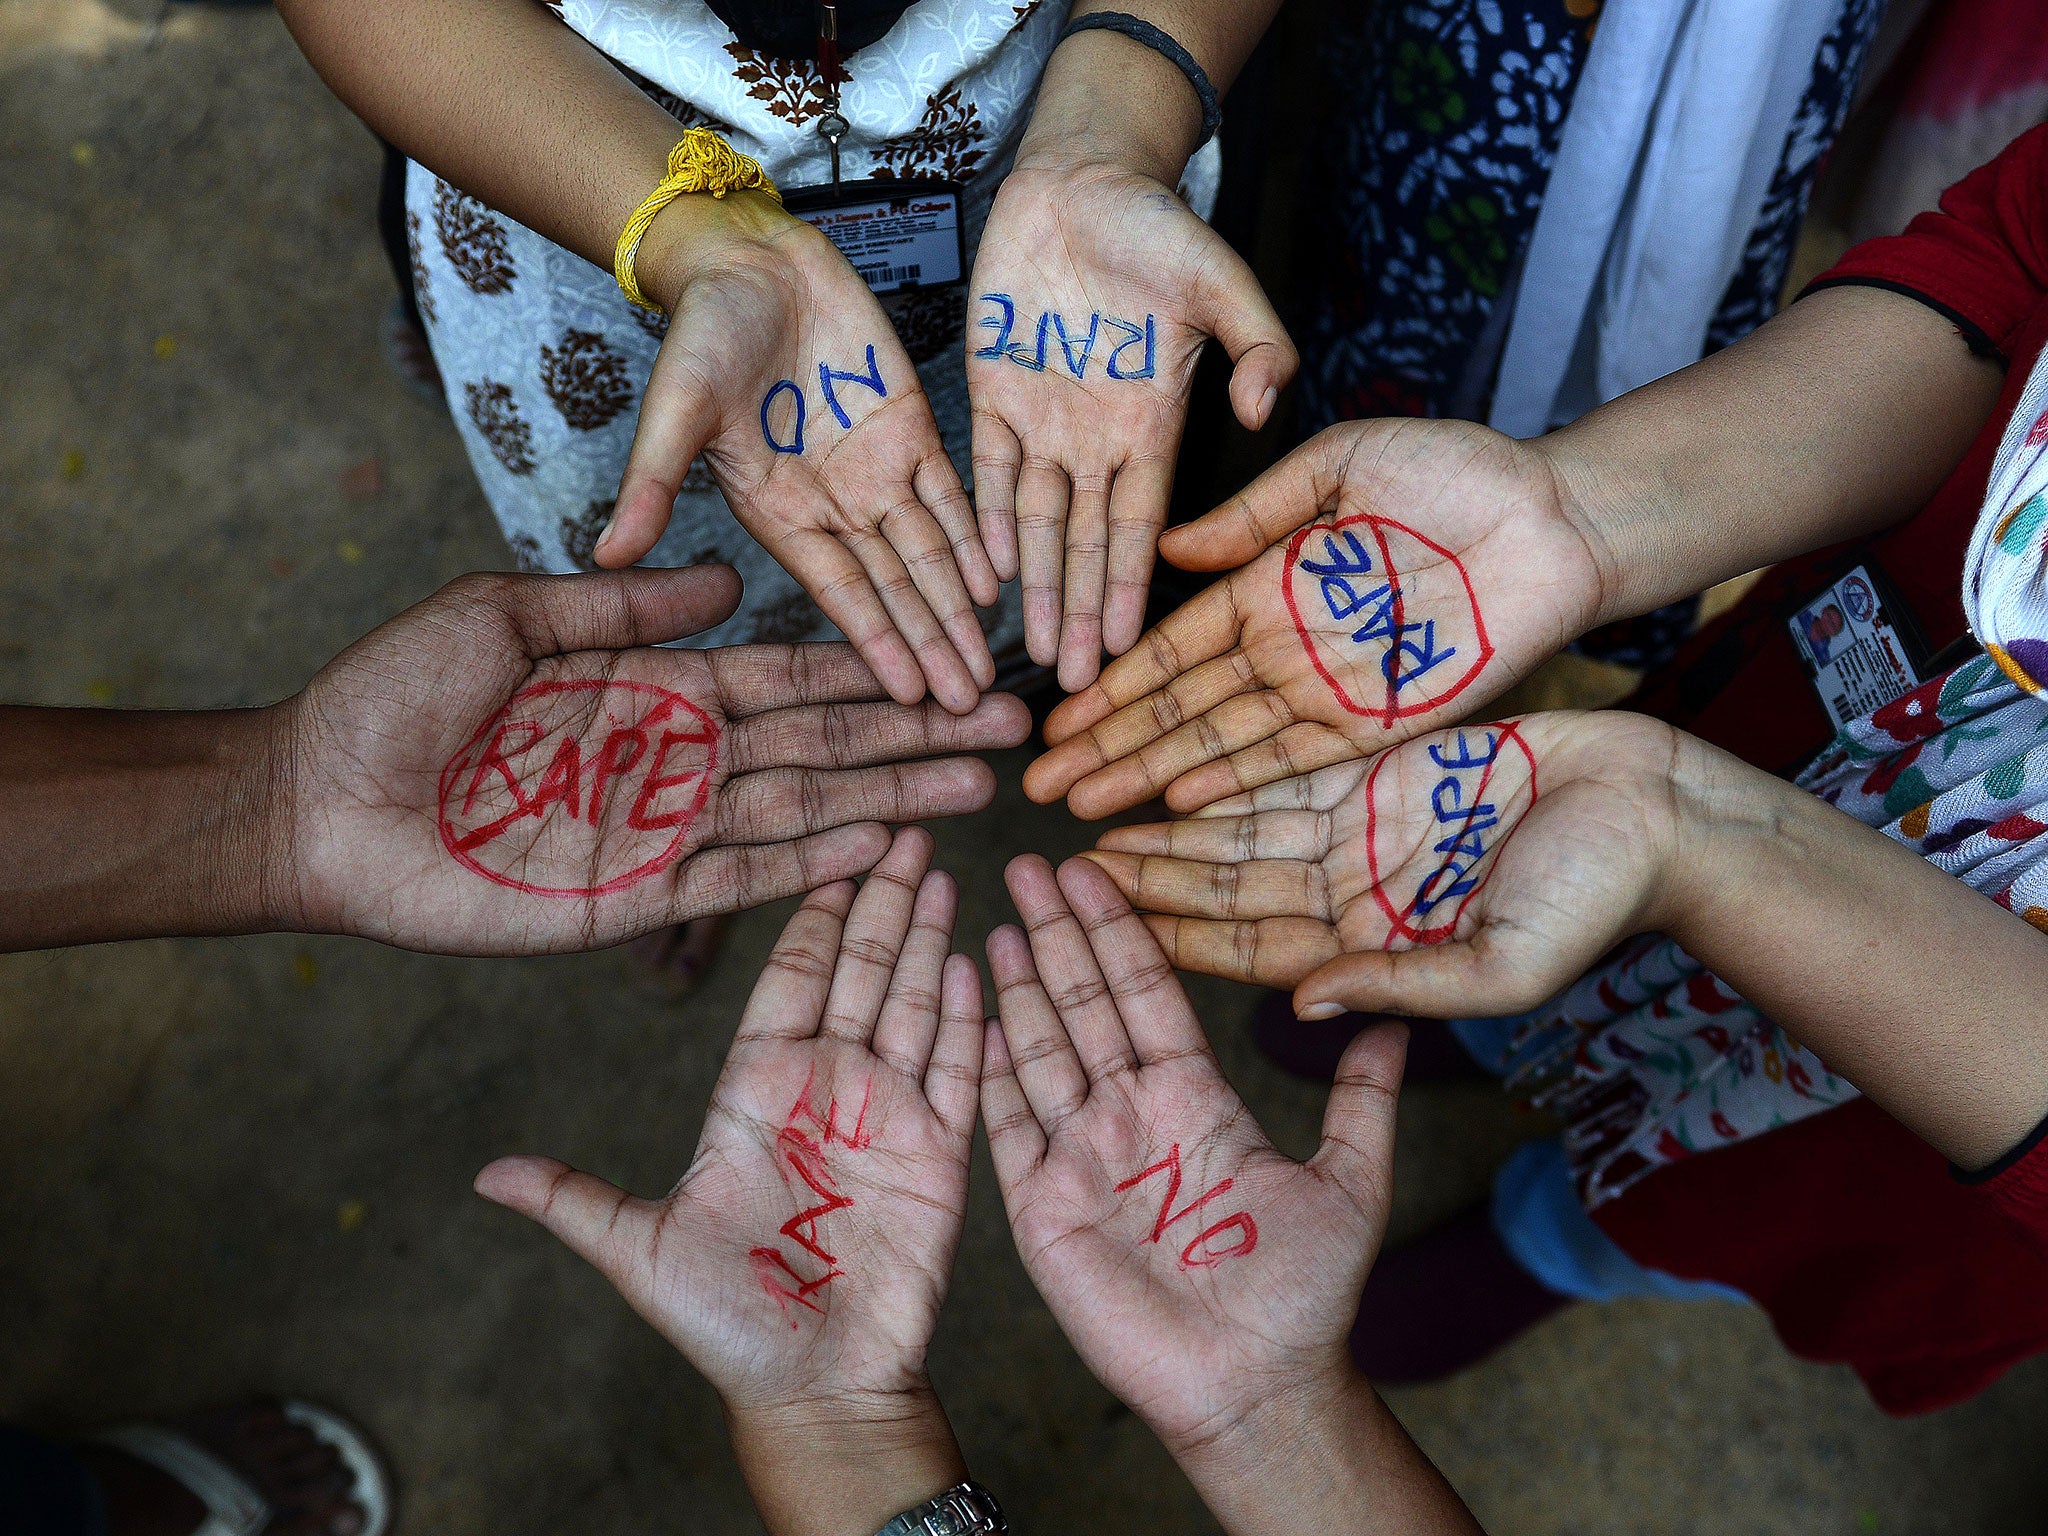 Indian students take part in an anti-rape protest